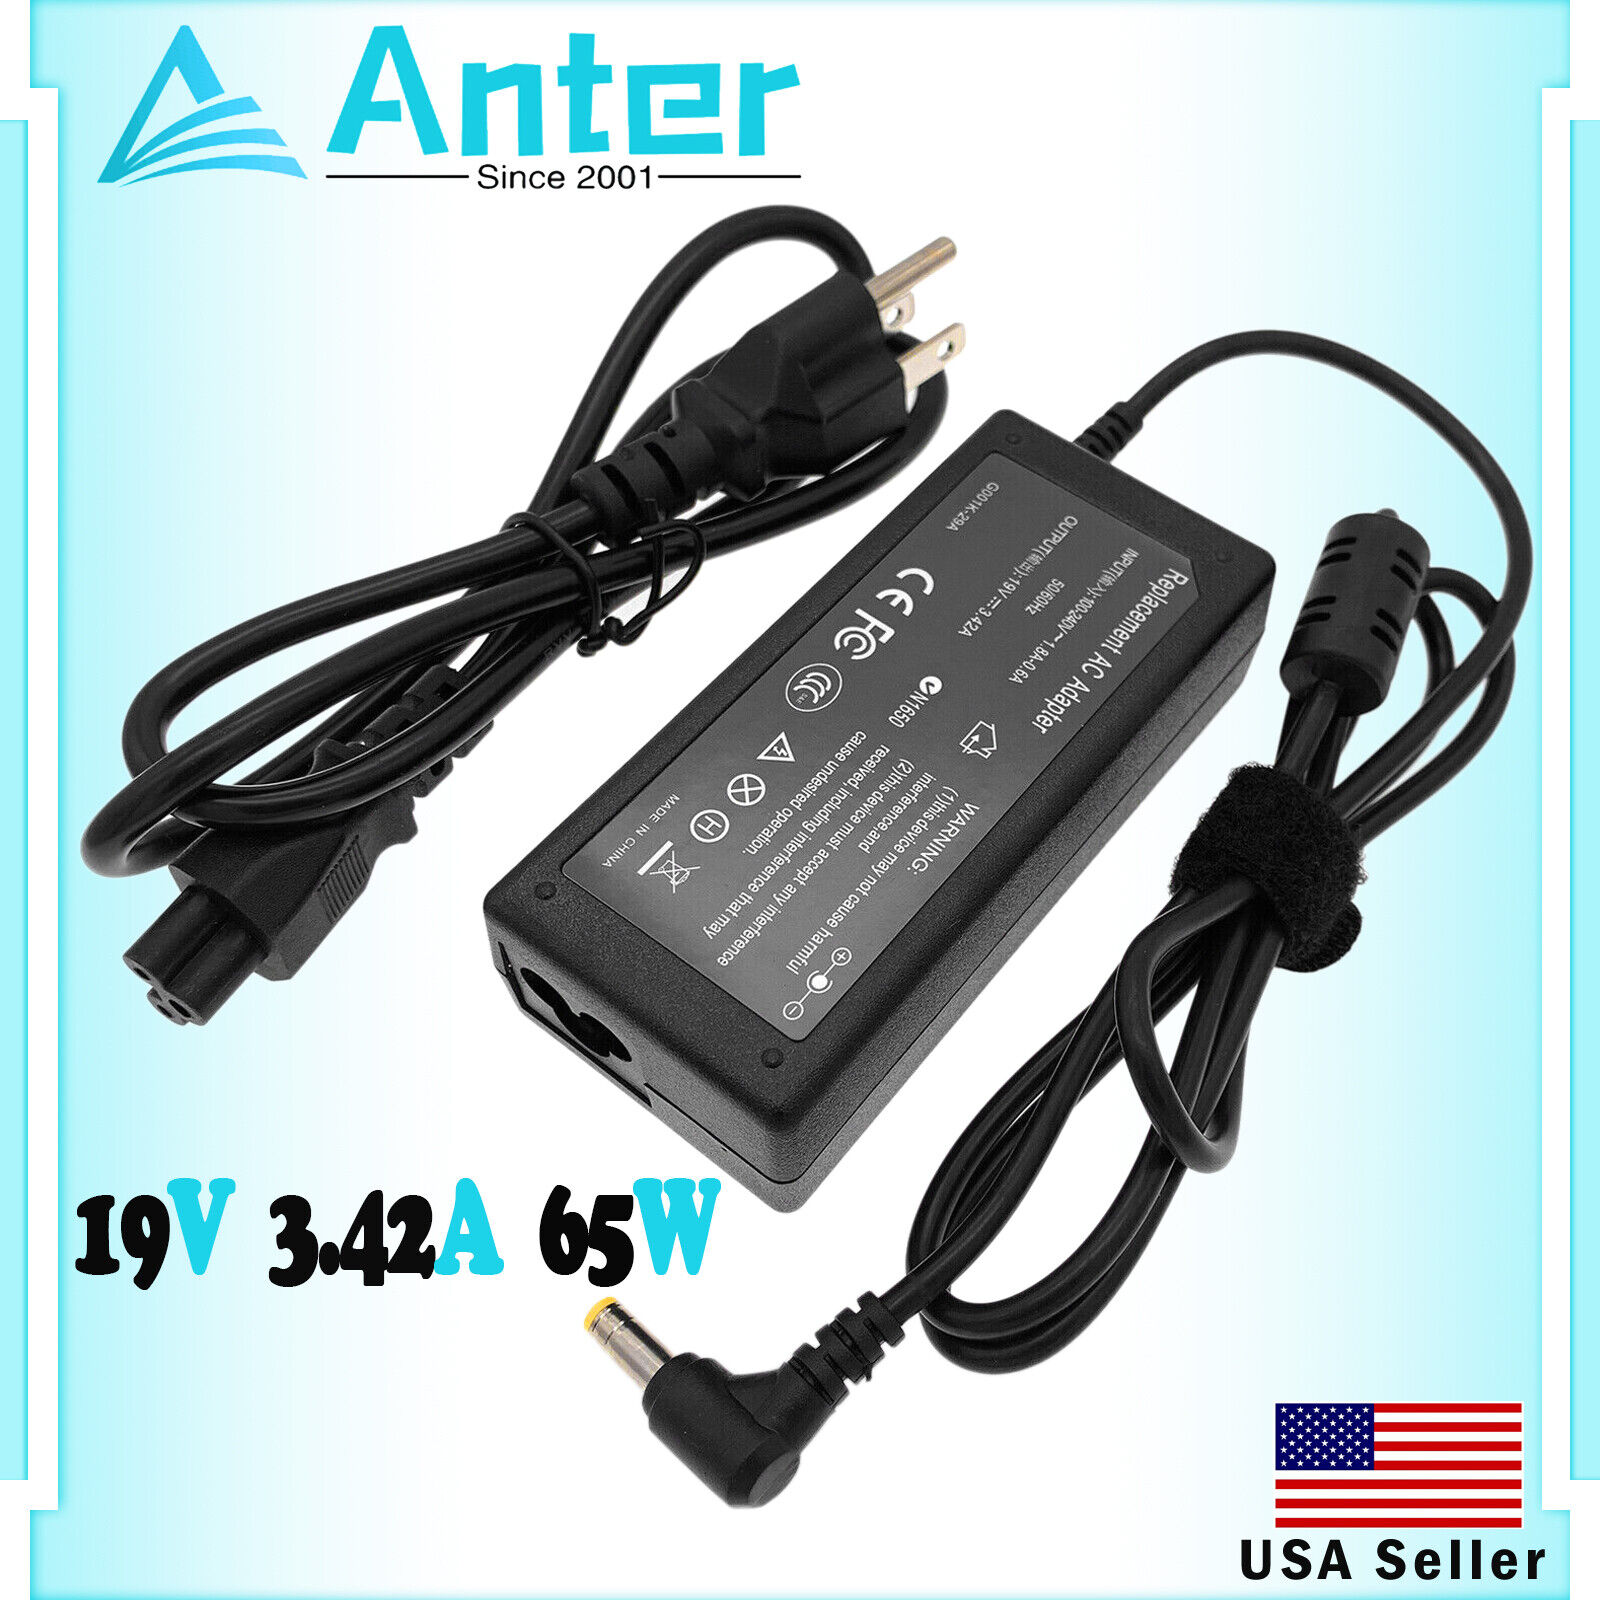 AC Adapter Charger For Viewsonic VX2253mh-LED VX2453mh-LED LED LCD Monitor Power